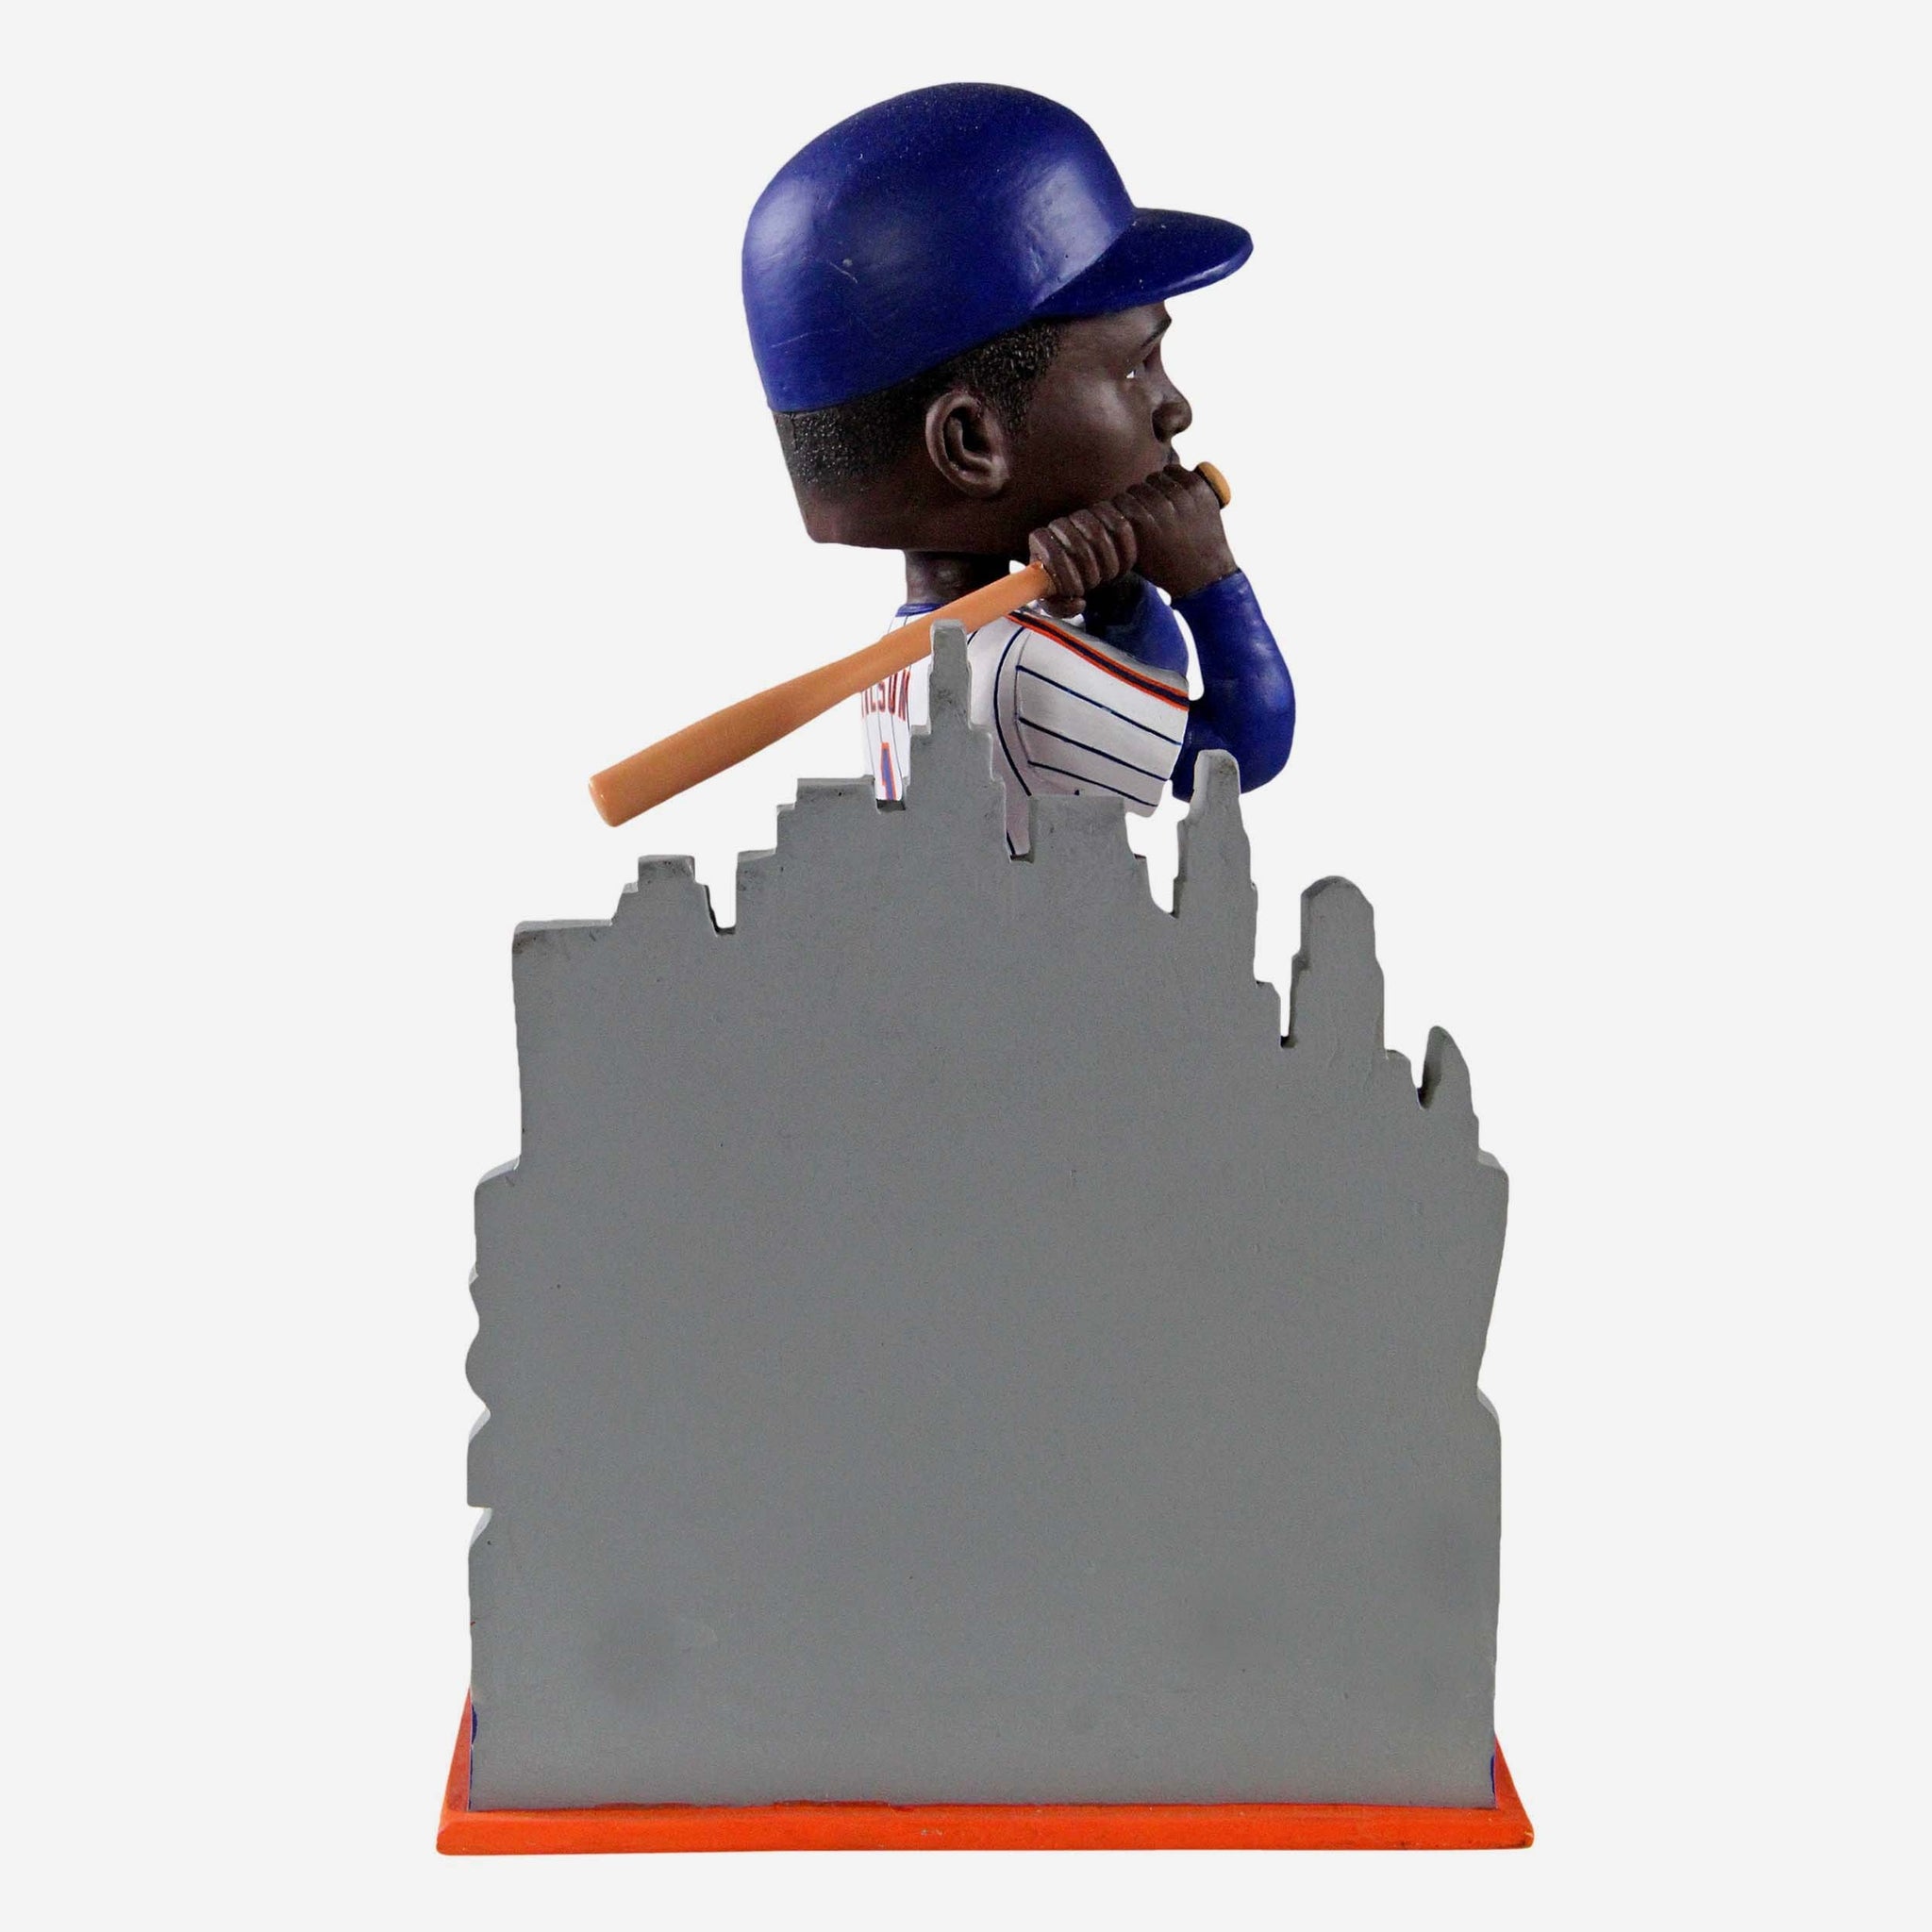 LOOK: FOCO releases multiple 1986 Mets' World Series champion bobbleheads